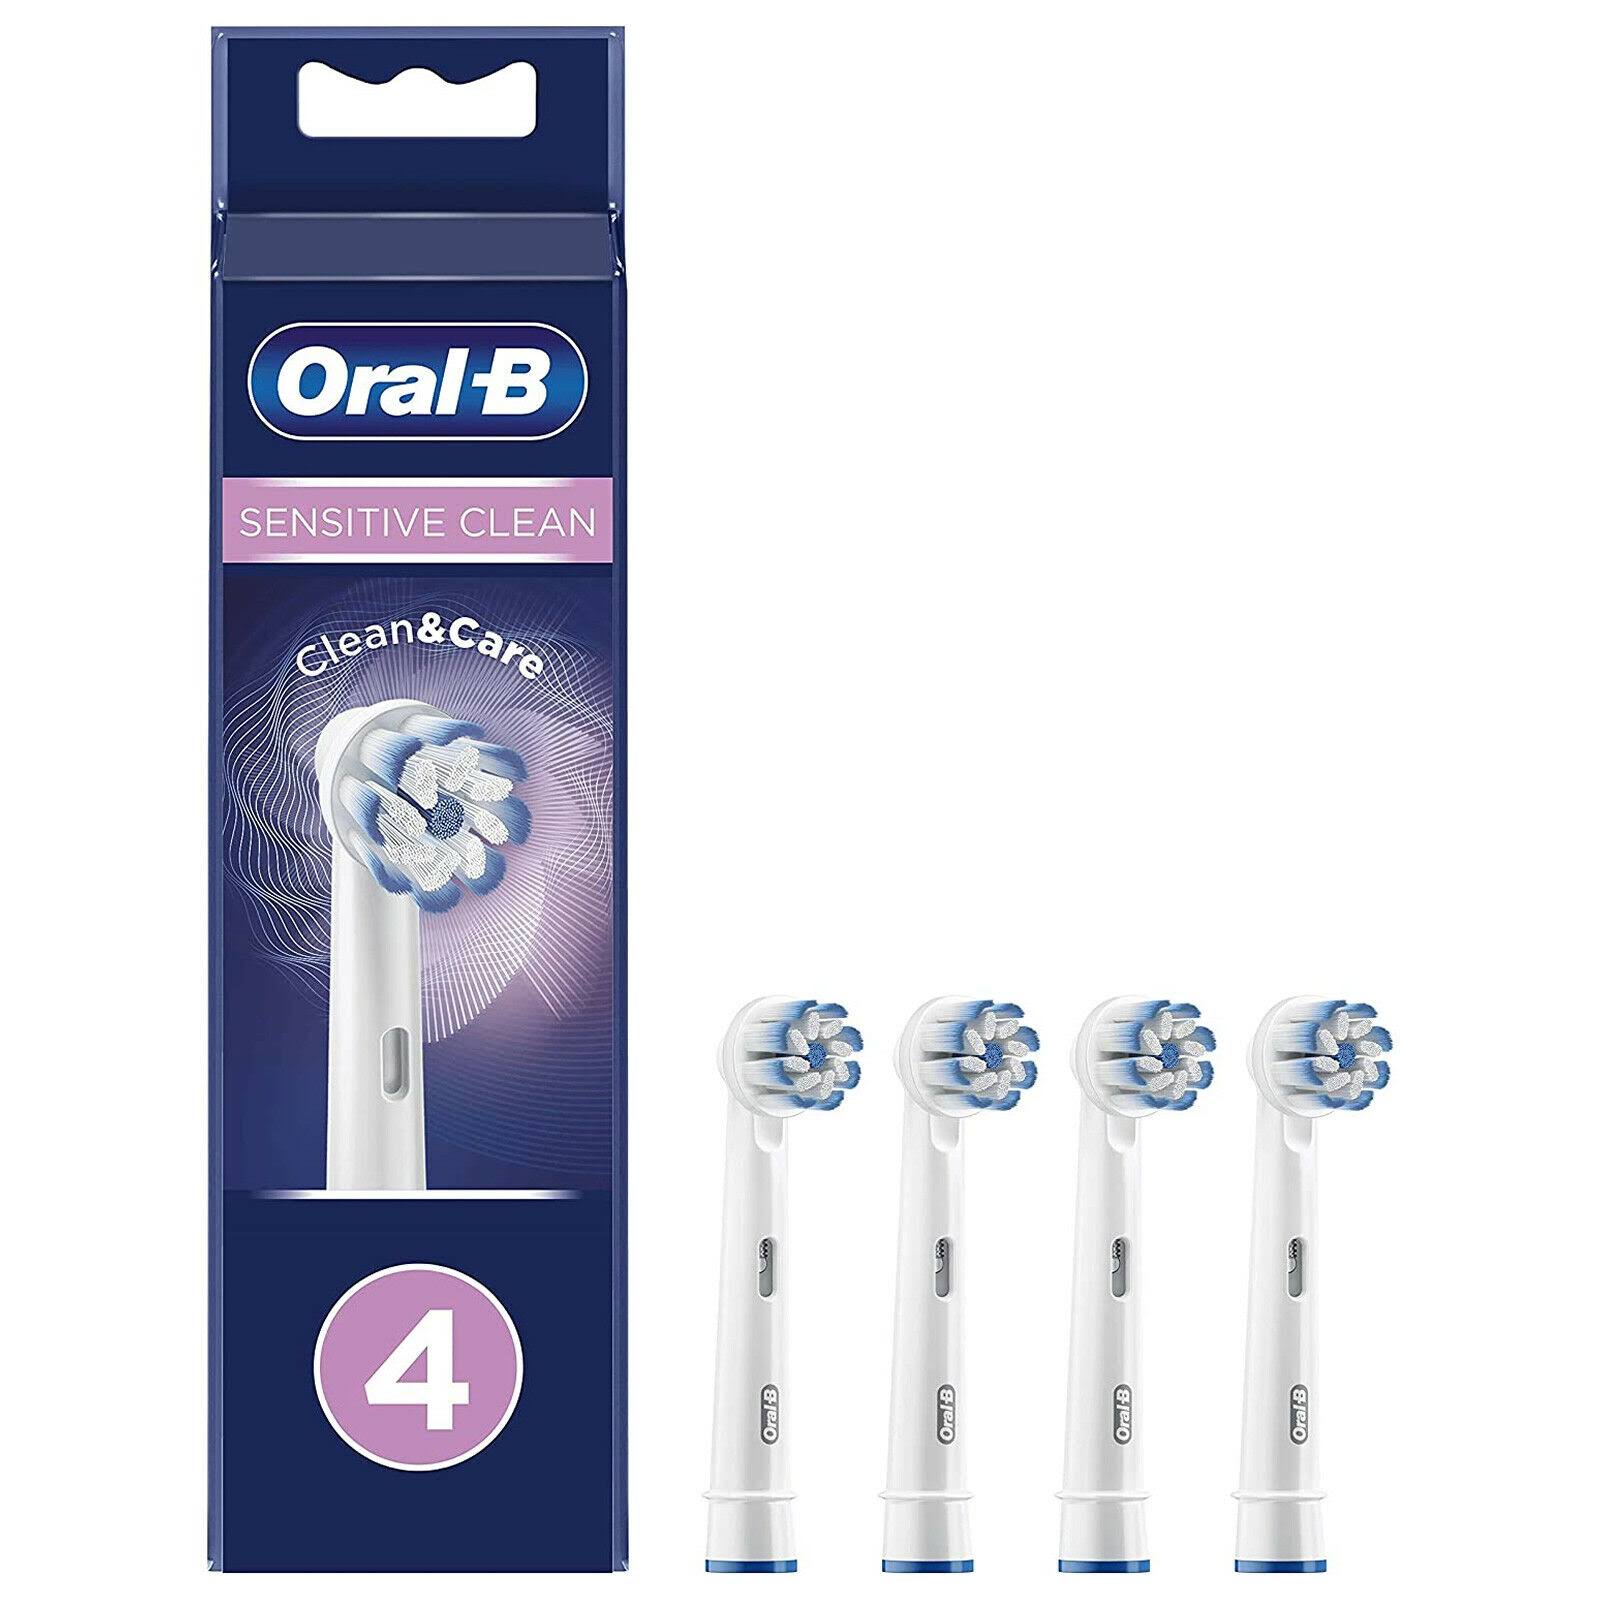 Oral B Sensitive Clean Electric Toothbrush Heads 4 Pack